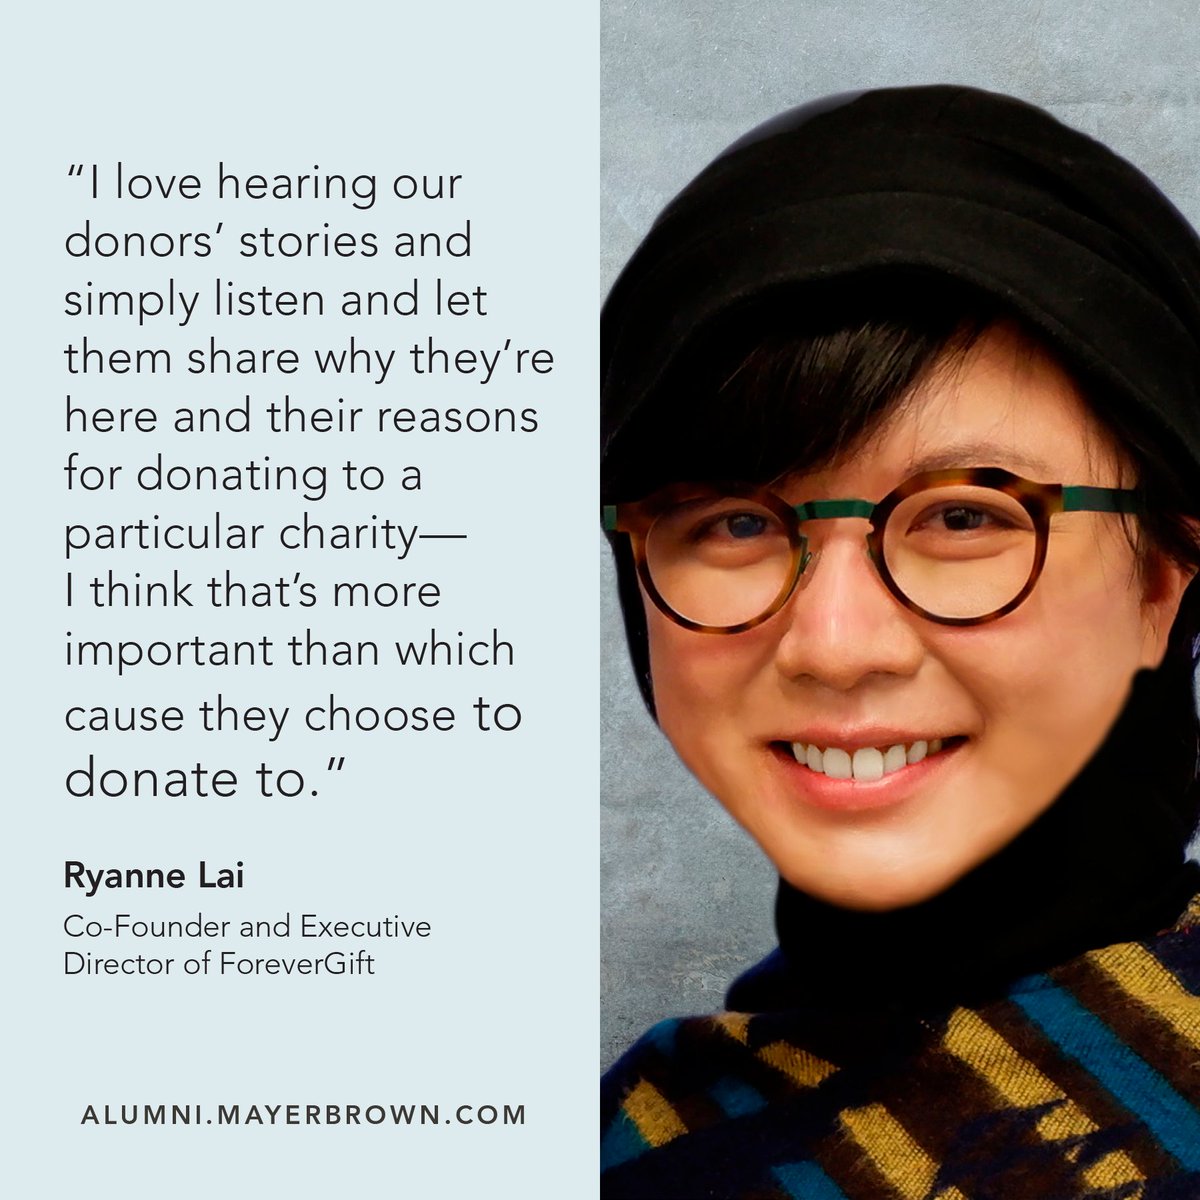 Mayer Brown alumna Ryanne Lai left the legal sector to pursue her own business venture. Now cofounder and executive director of Hong Kong legacy giving organization ForeverGift, she reflects on her path to founding this social enterprise. bit.ly/46zXiX6 #MayerBrownAlumni